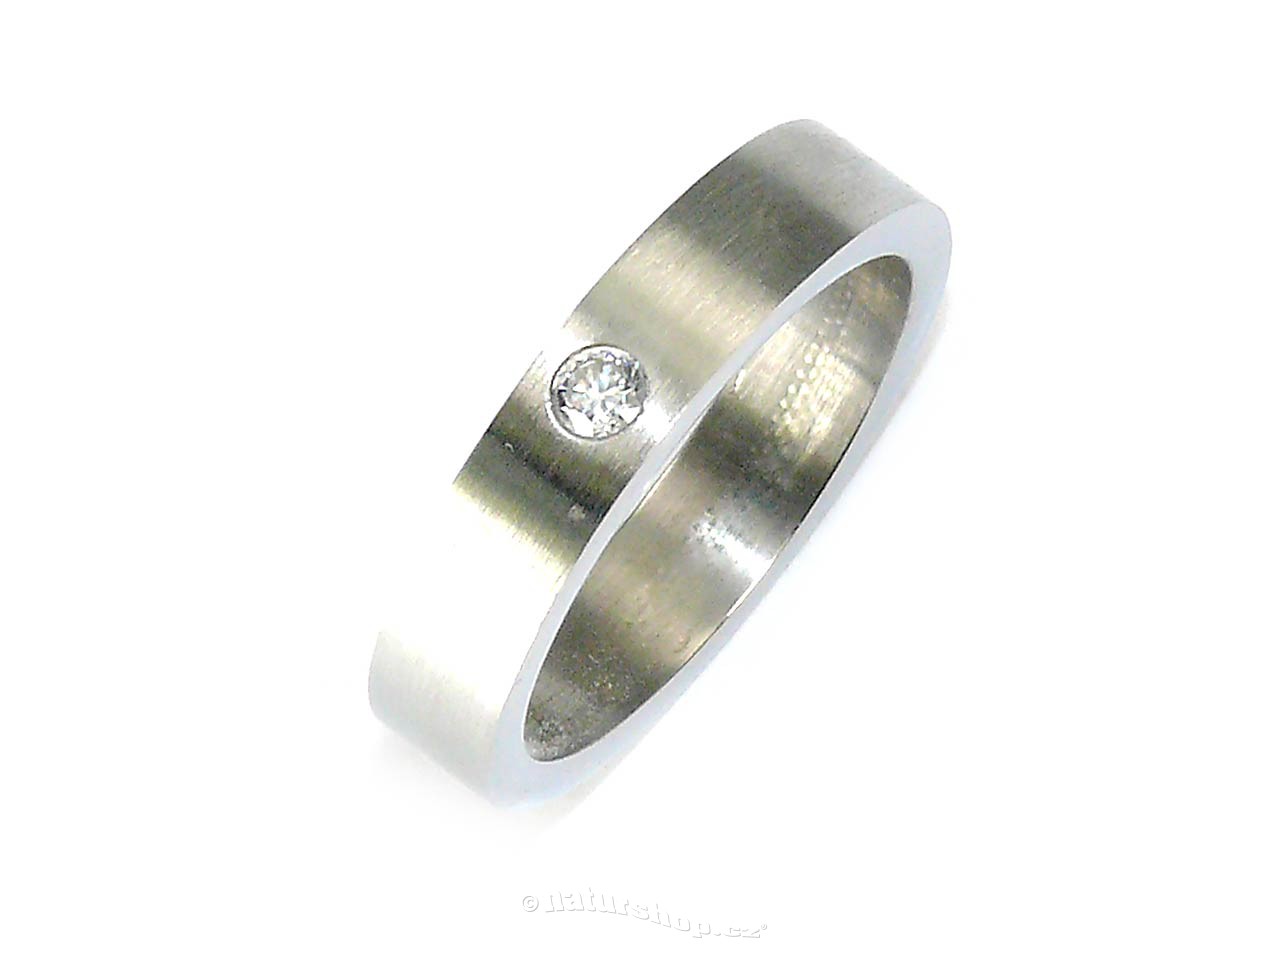 High Polish Surgical Steel Patterned Ring - 316L Surgical Grade Stainless  Steel Steel Rings